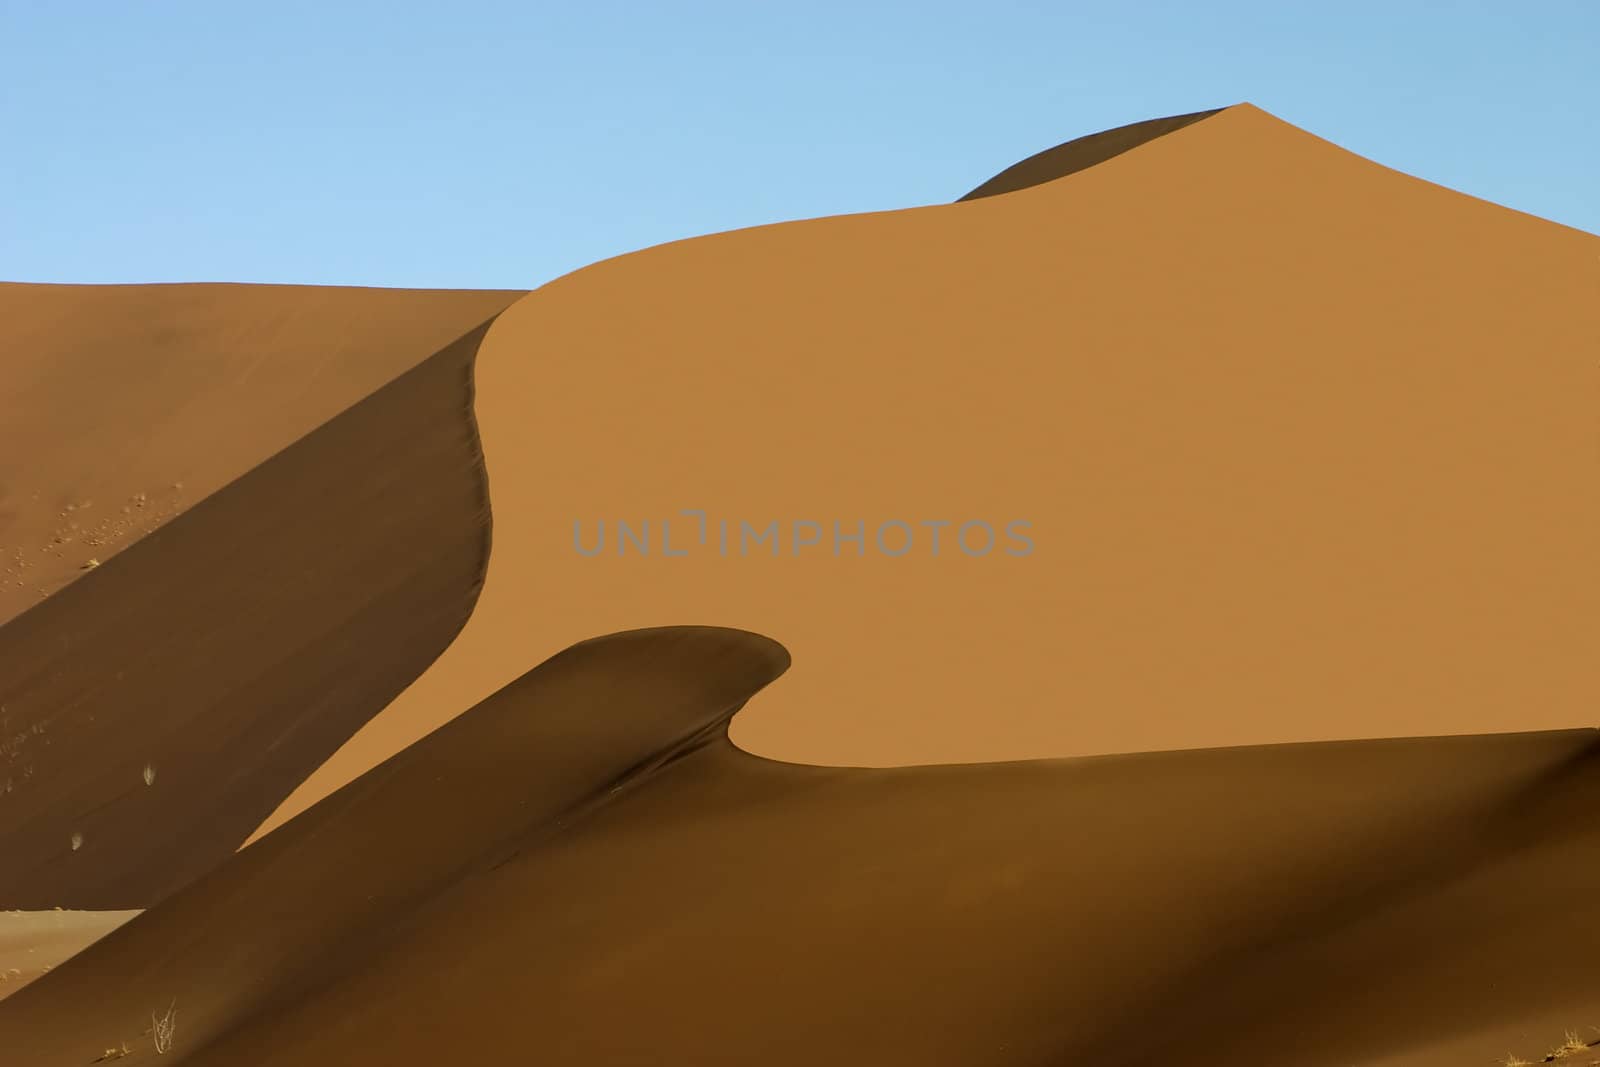 A large orange sand dune with wave like shadows to the bottom and side against a light blue sky